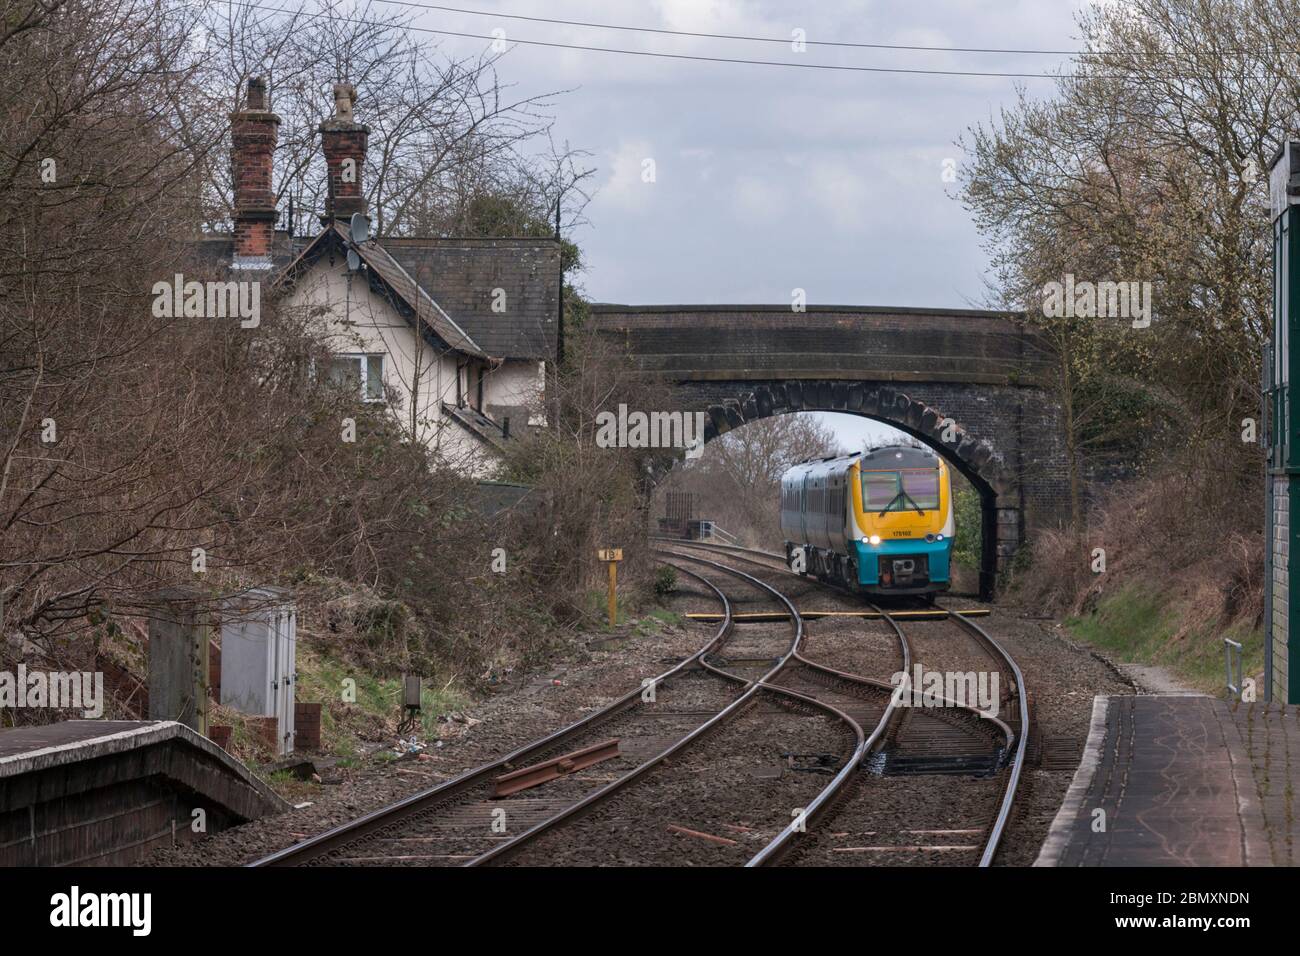 Arriva train Wales Alstom Coradia class 175 diesel train arriving at Runcorn East on the north Cheshire railway line Stock Photo